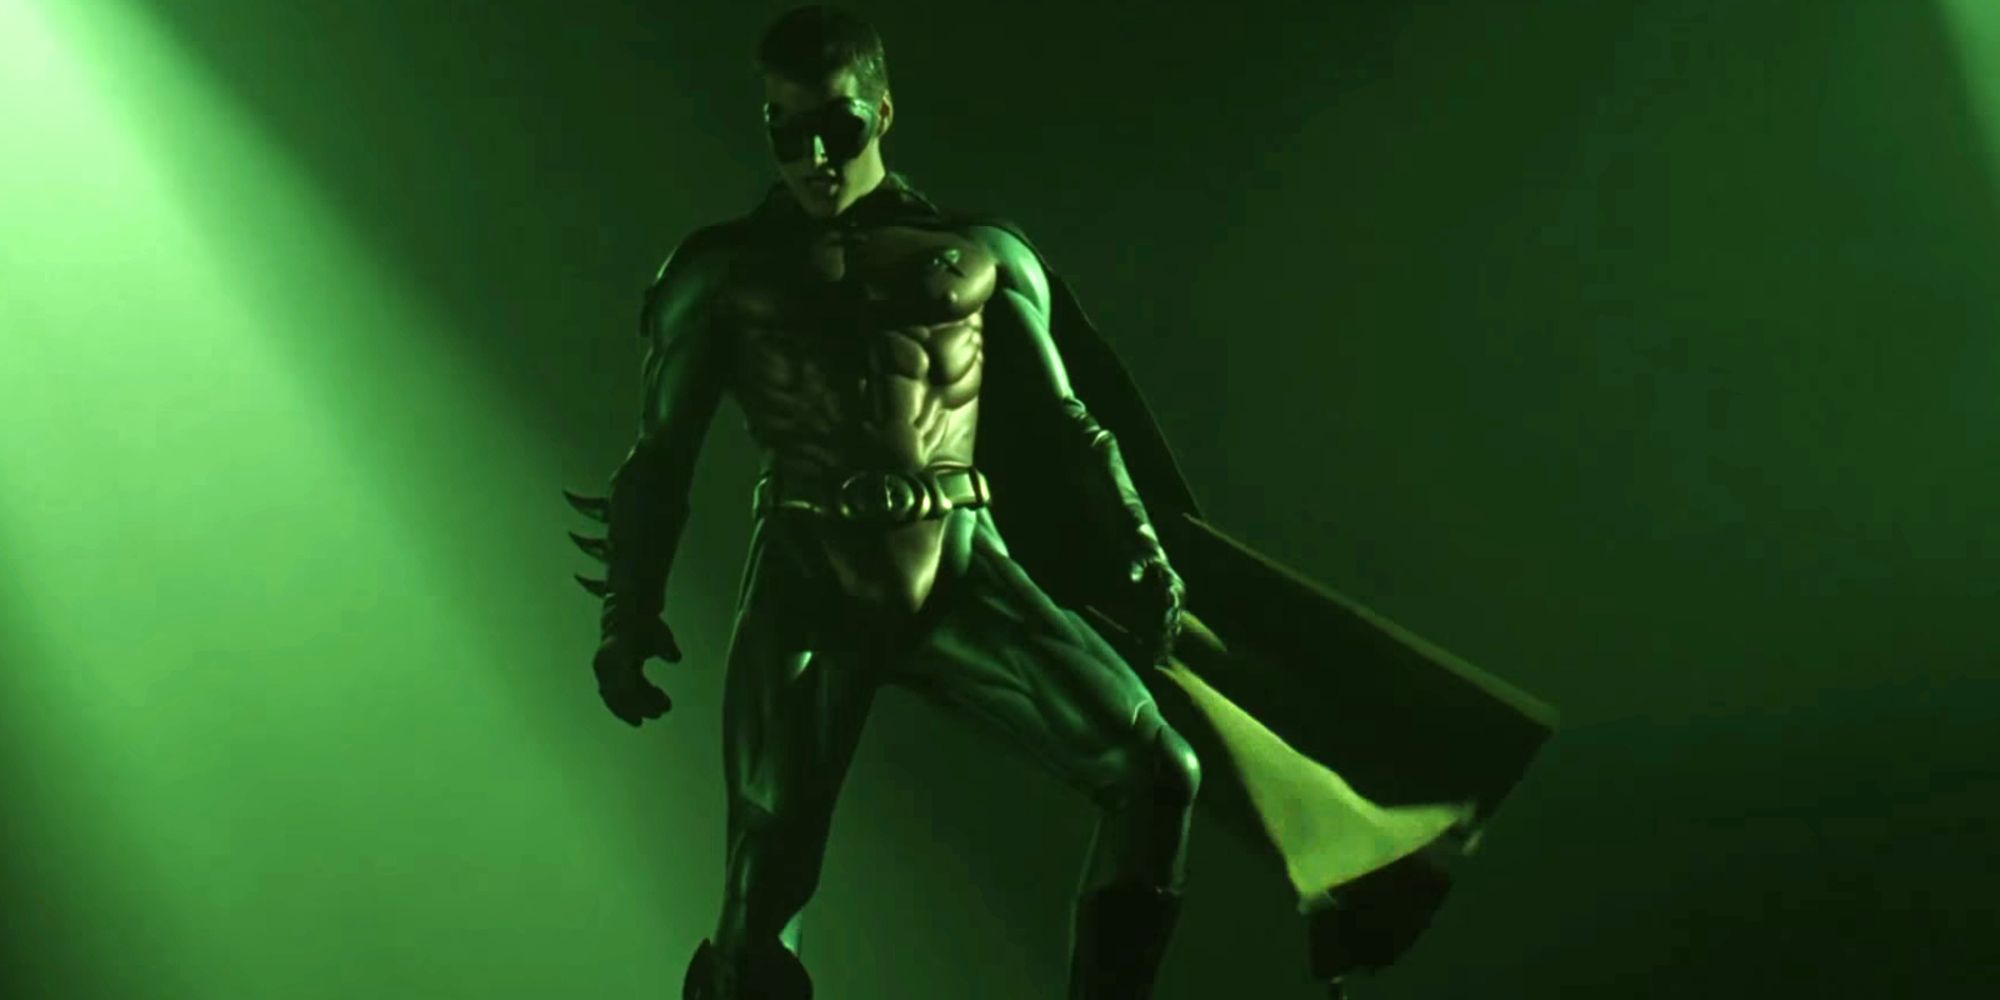 Dick Grayson AKA Robin standing over Two-Face in Batman Forever